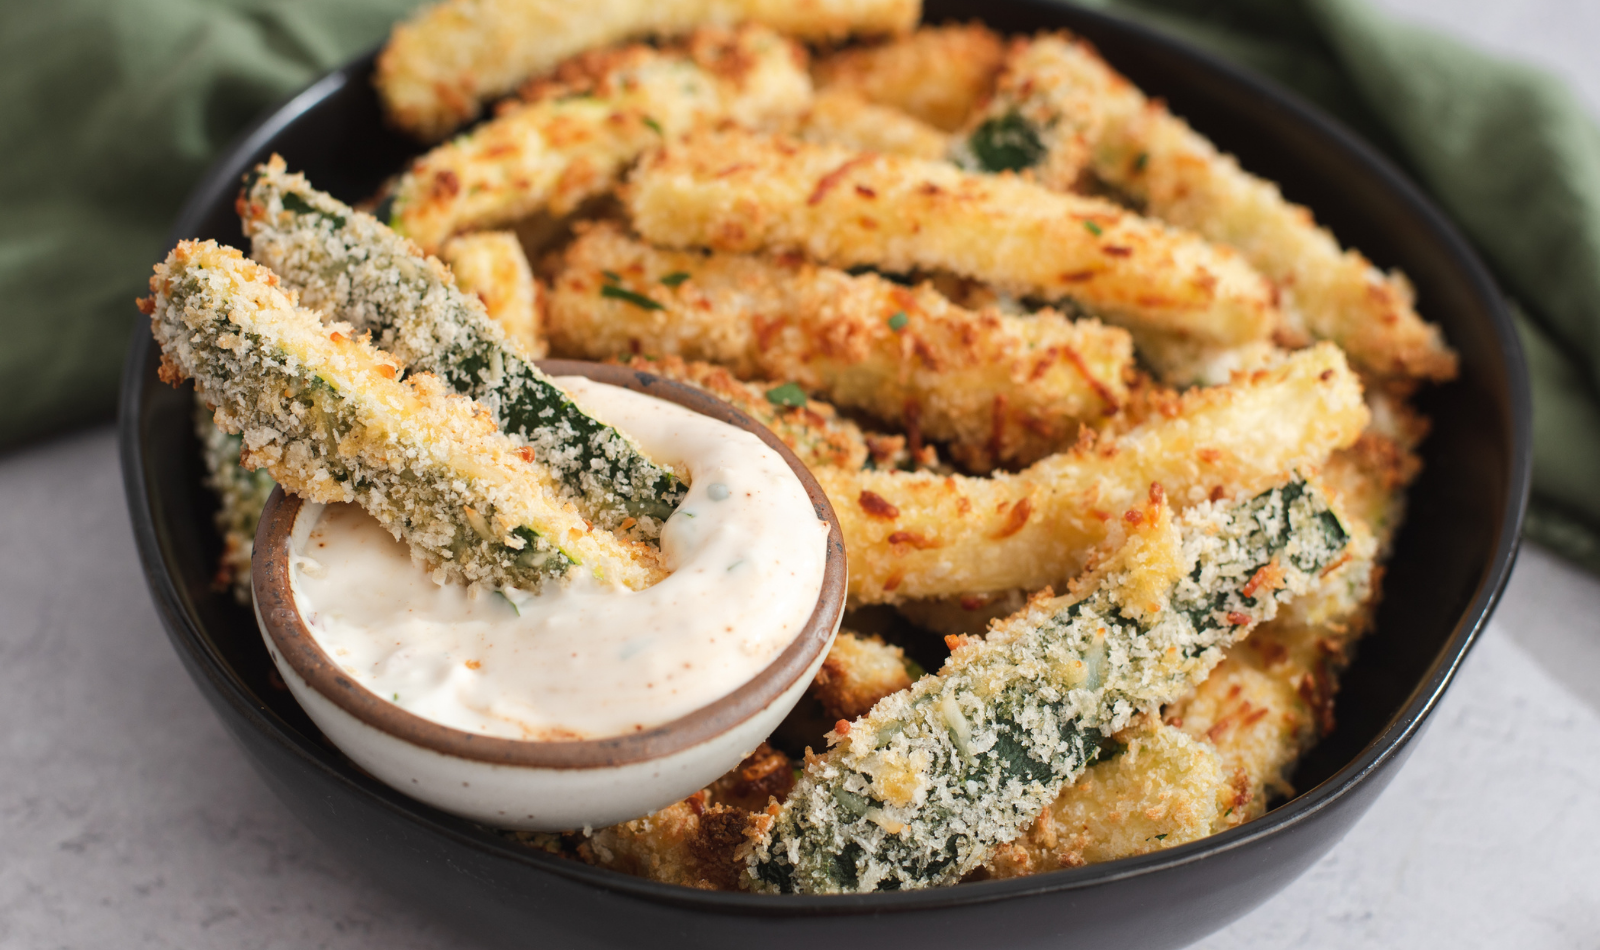 Featured Image - Air Fryer Zucchini Fries